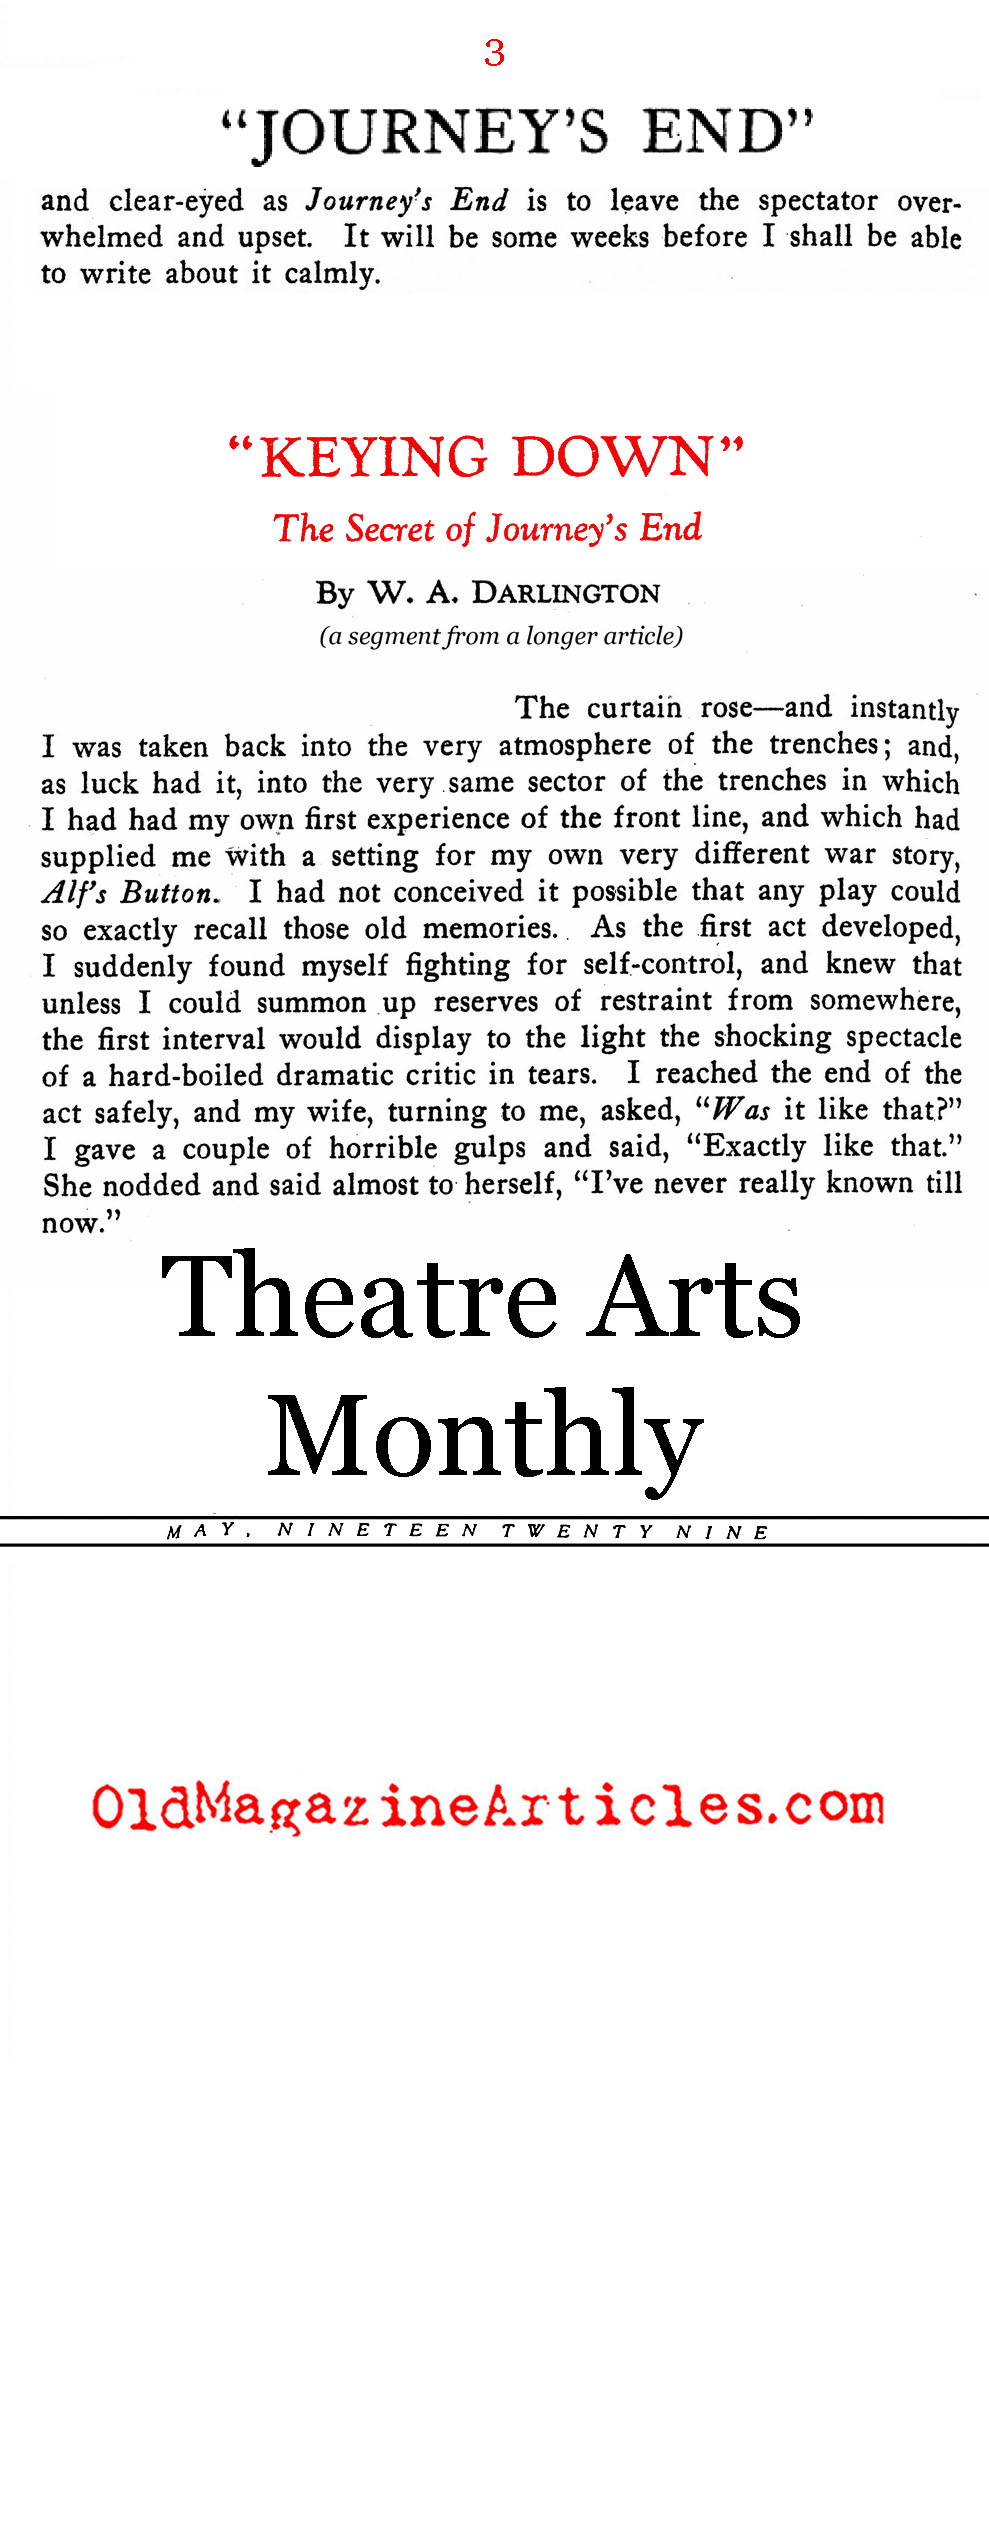 JOURNEY'S END by R.C. Sheriff (Theatre Arts Magazine, 1929)